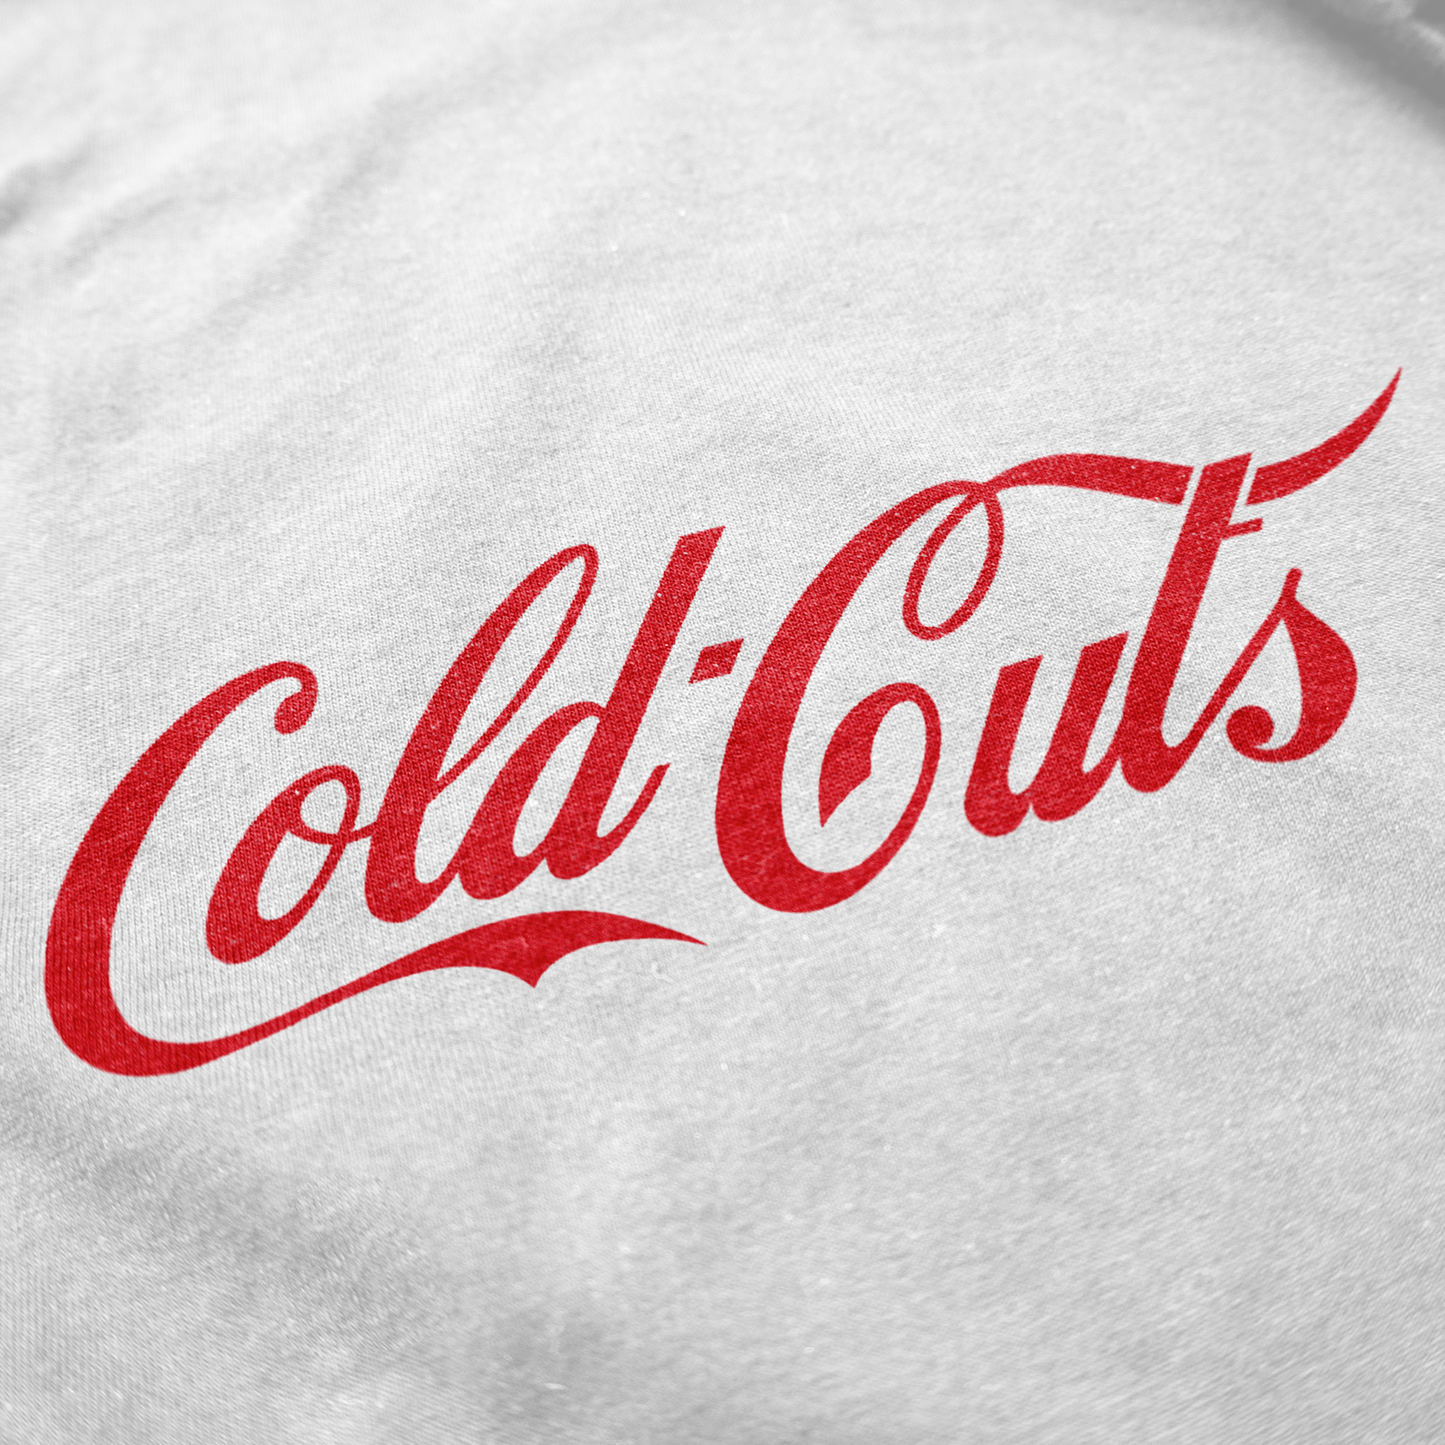 The Cold Cuts Tee